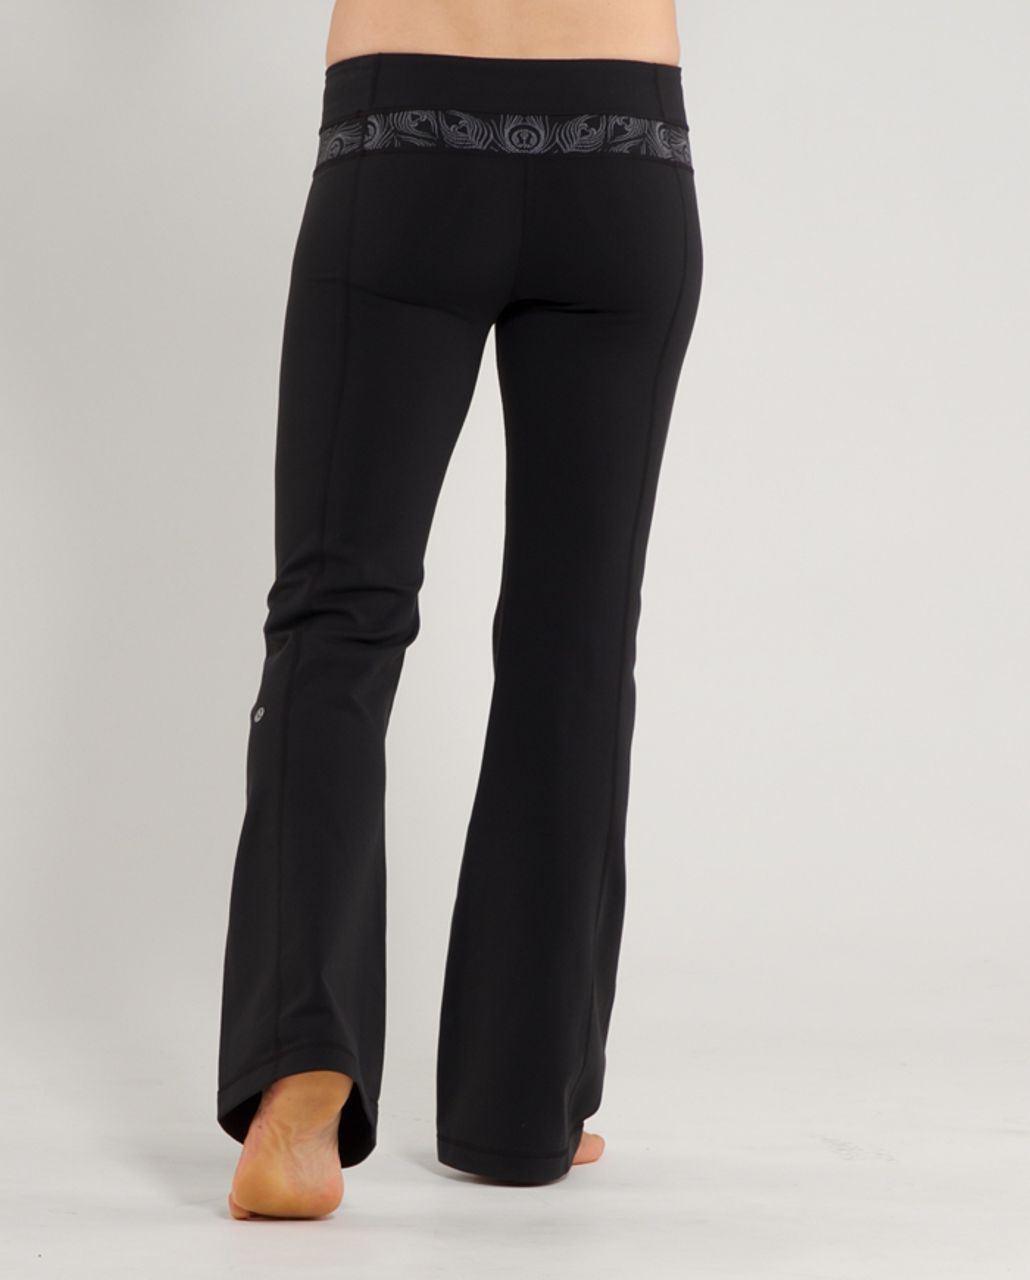 Lululemon Groove Pant (Tall) - Black /  Silver Peacock Lace Reflective /  Black Space Dye